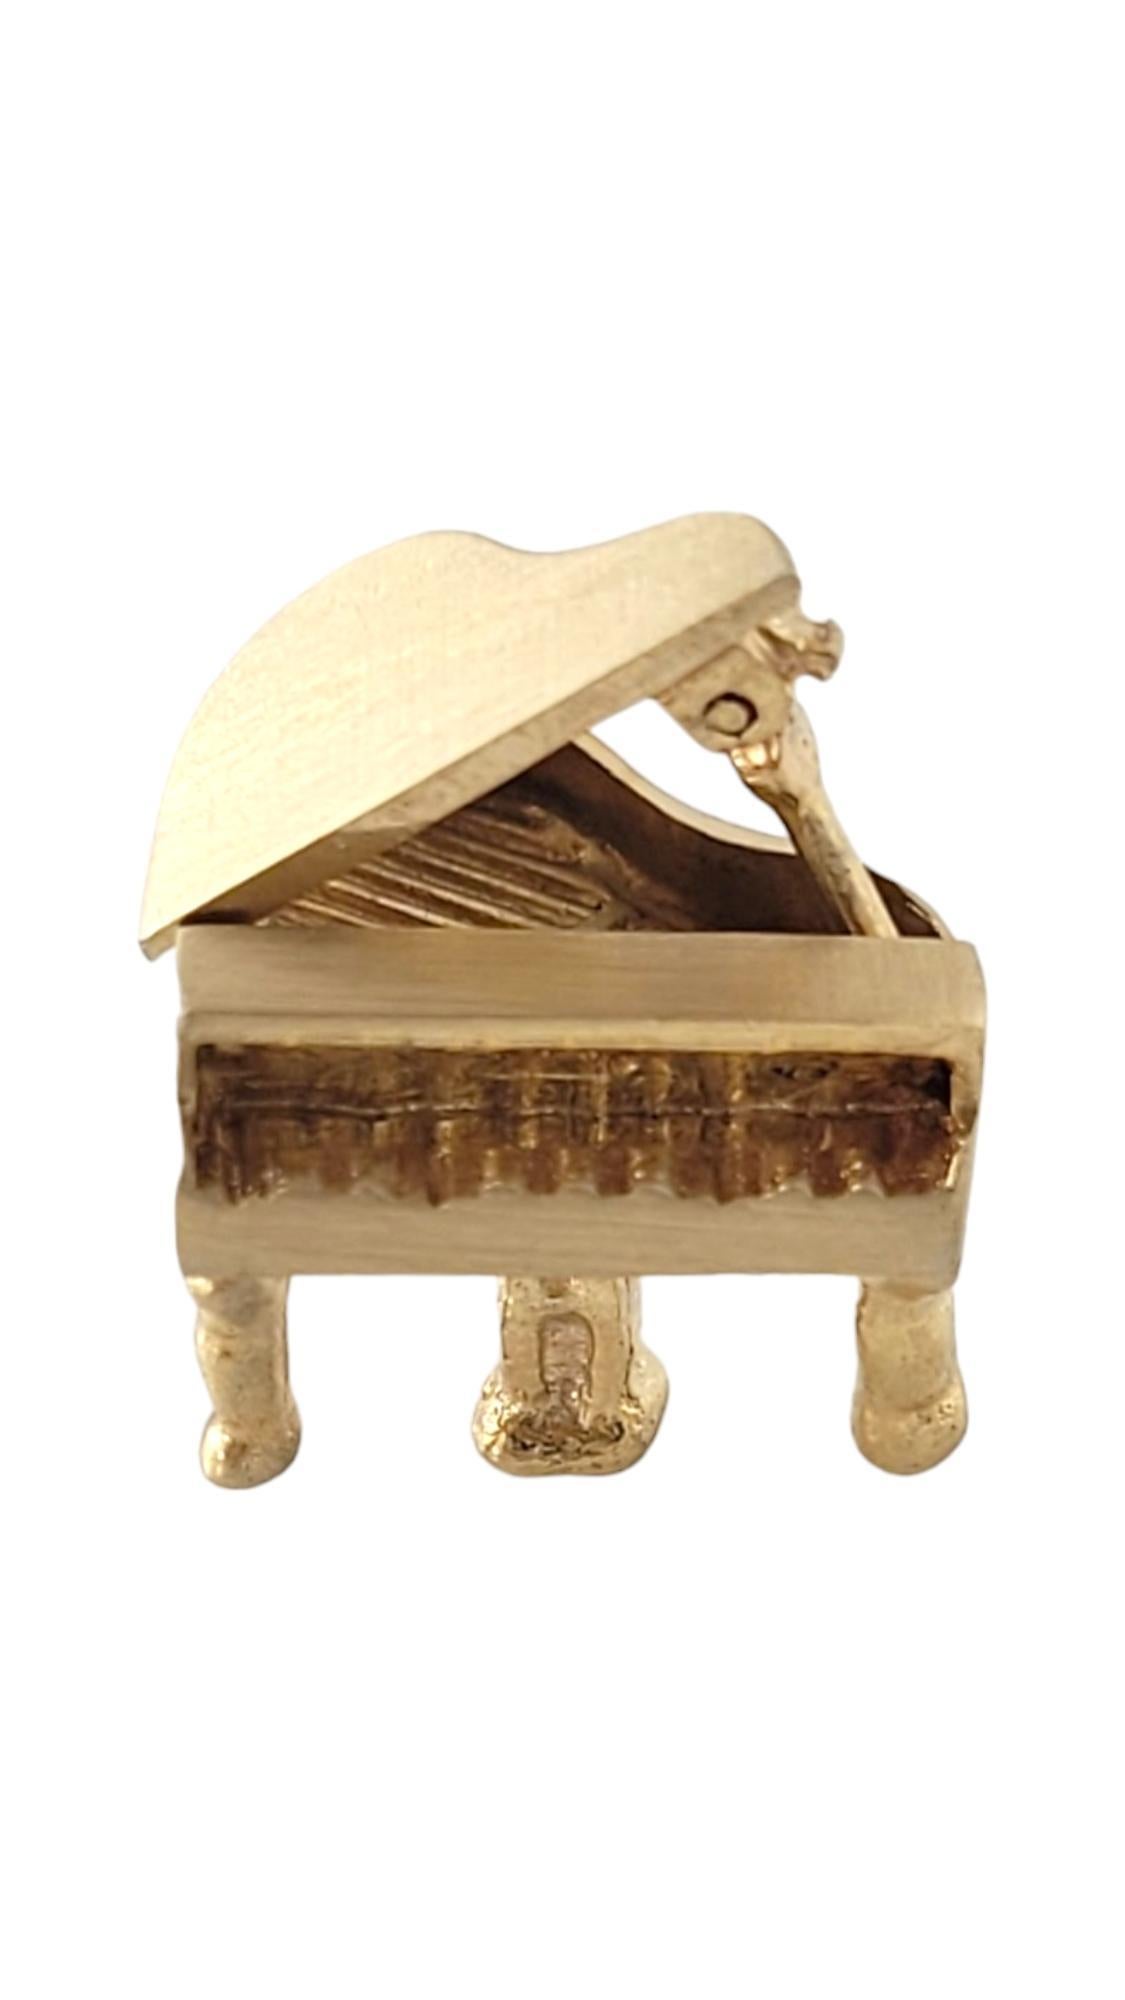 Vintage 14K Yellow Gold Piano Charm #16896

This adorable piano charm is meticulously crafted from 14K gold and is the perfect charm for a music lover!

Size: 9.9mm X 13.1mm X 15.5mm 

Weight: 3.0 dwt/ 4.7 g

Hallmark: 14K

Very good condition,